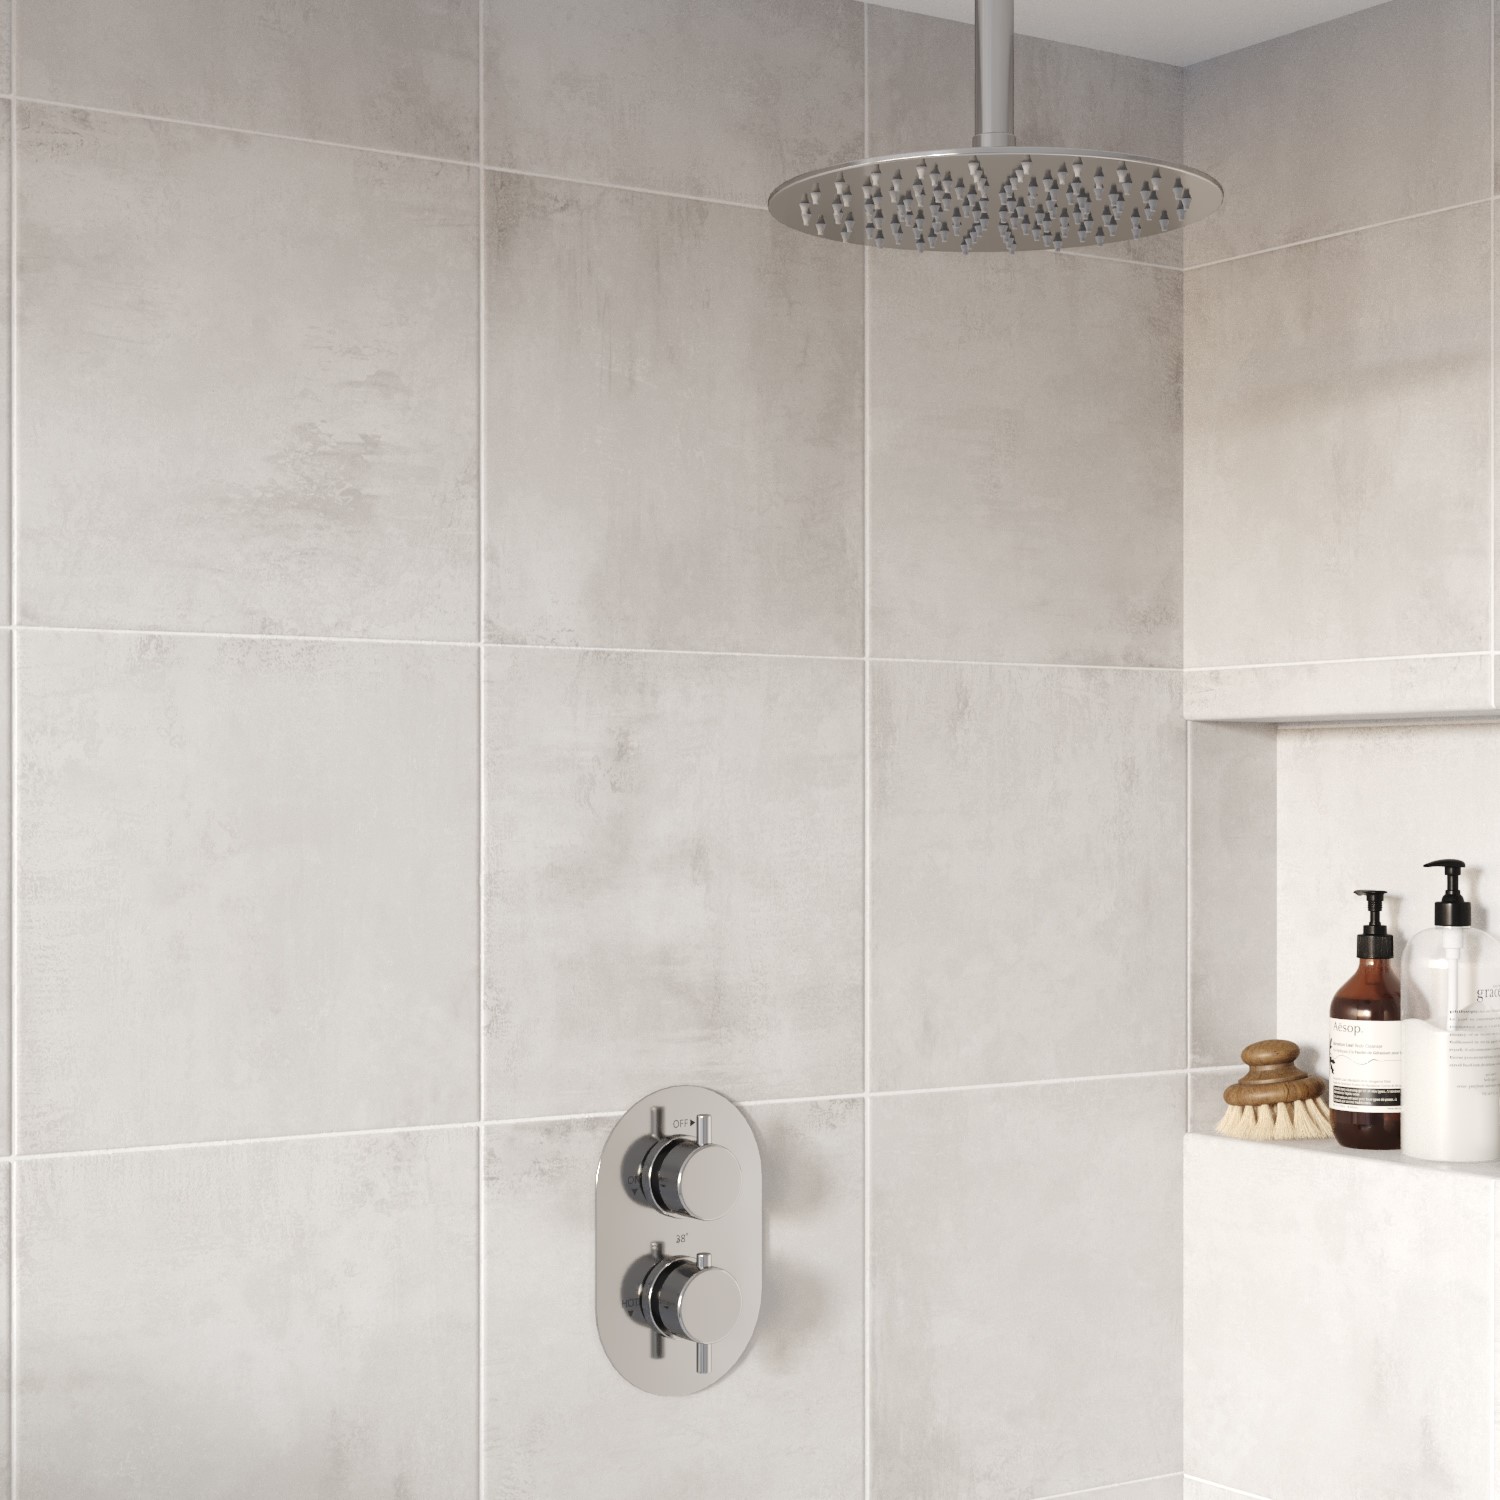 Concealed Thermostatic Mixer Shower with Ceiling Rainfall Head - Flow